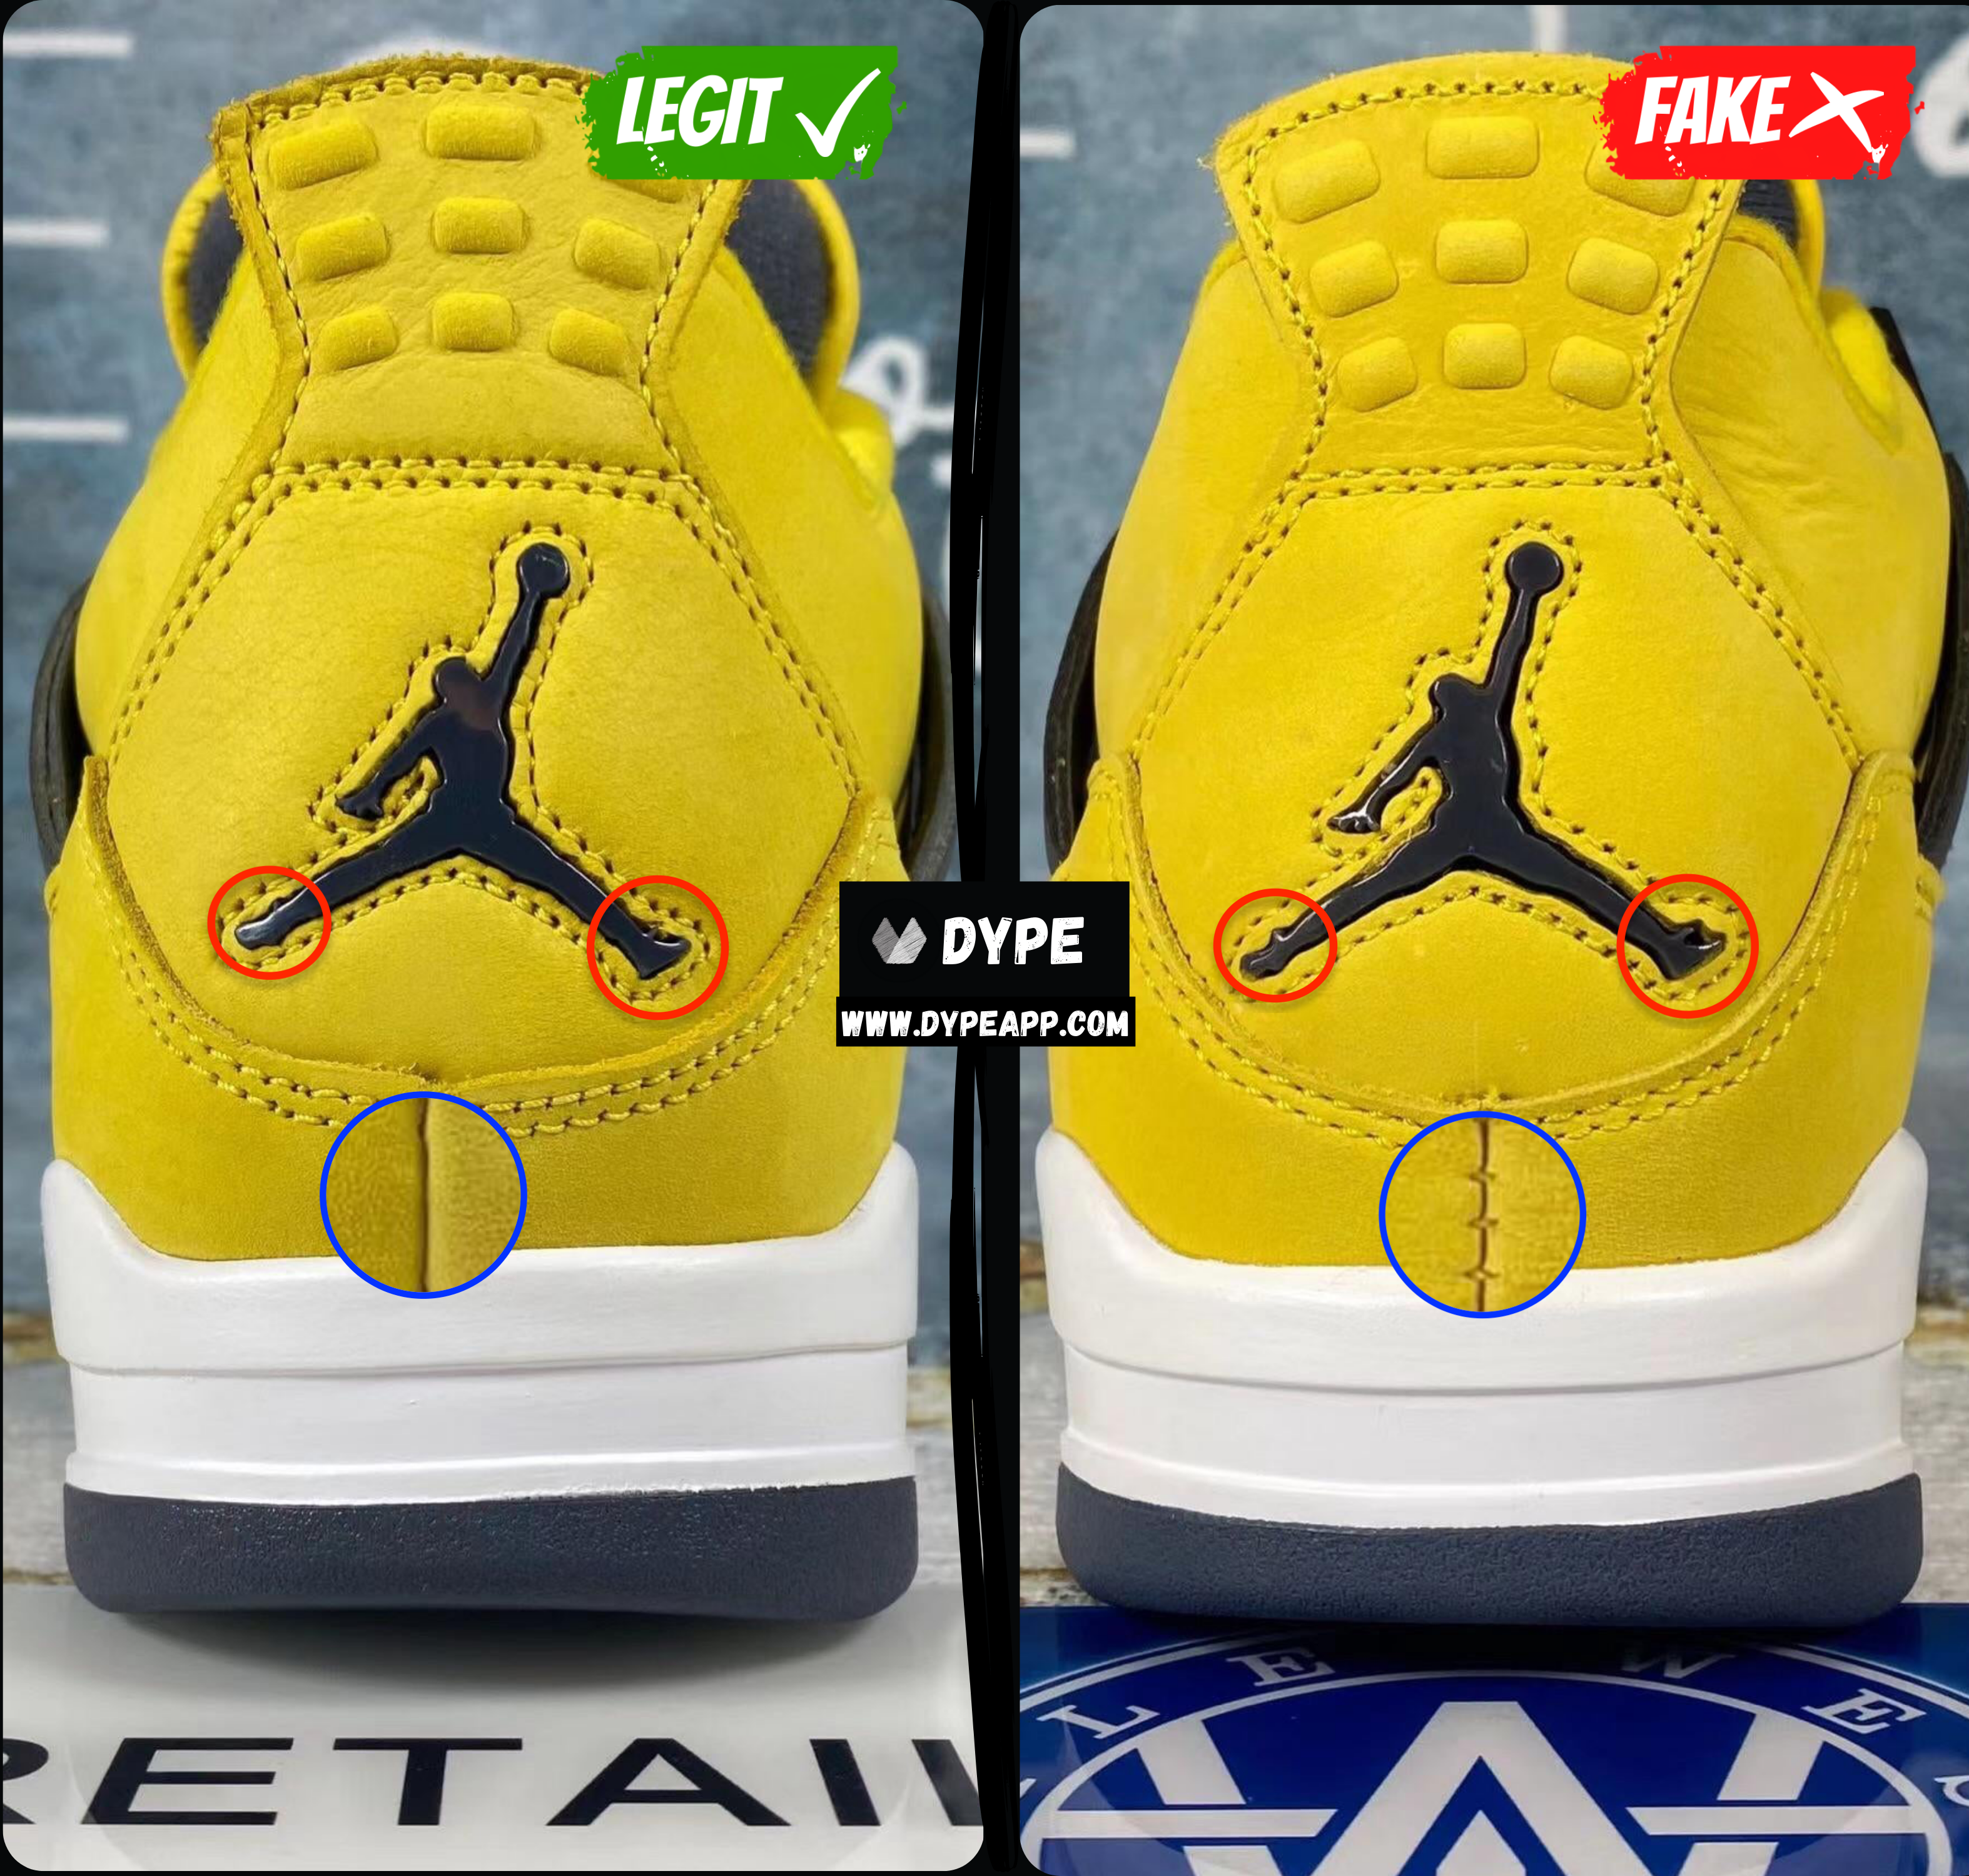 Nike Air Jordan 4 laces: How to tie them right?